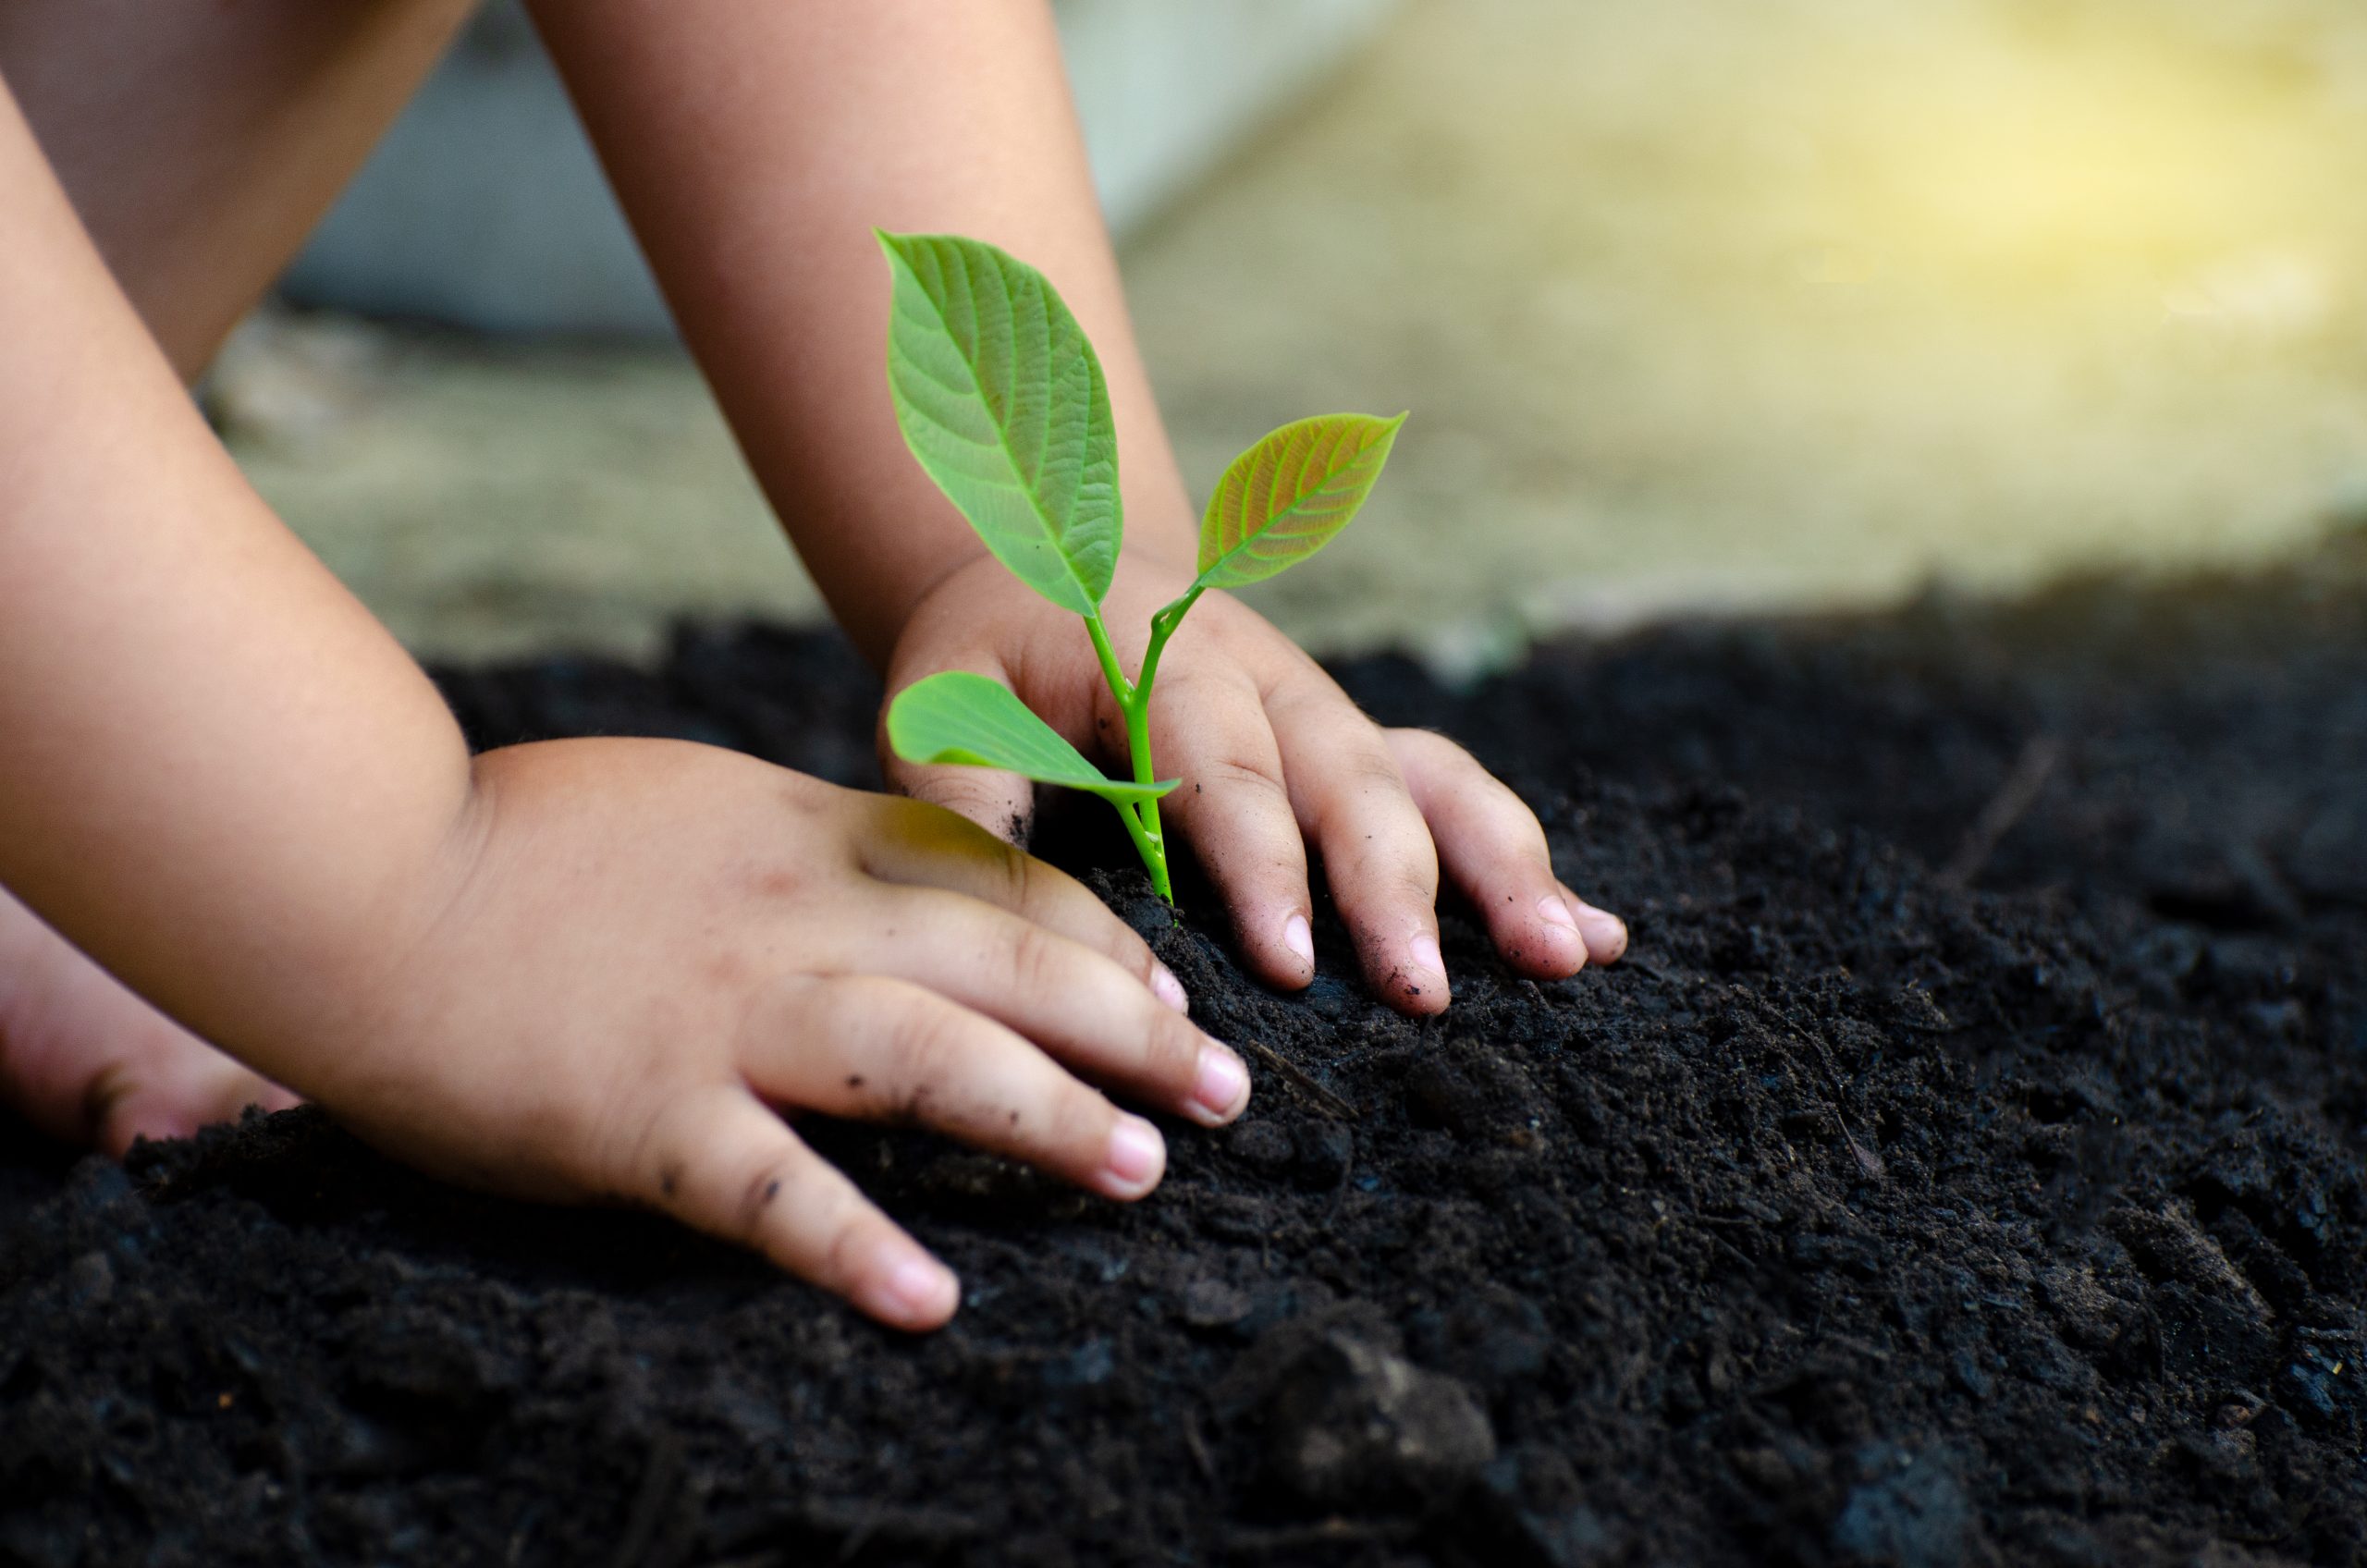 Child's hand planting tree sapling in soil supporting environmental causes